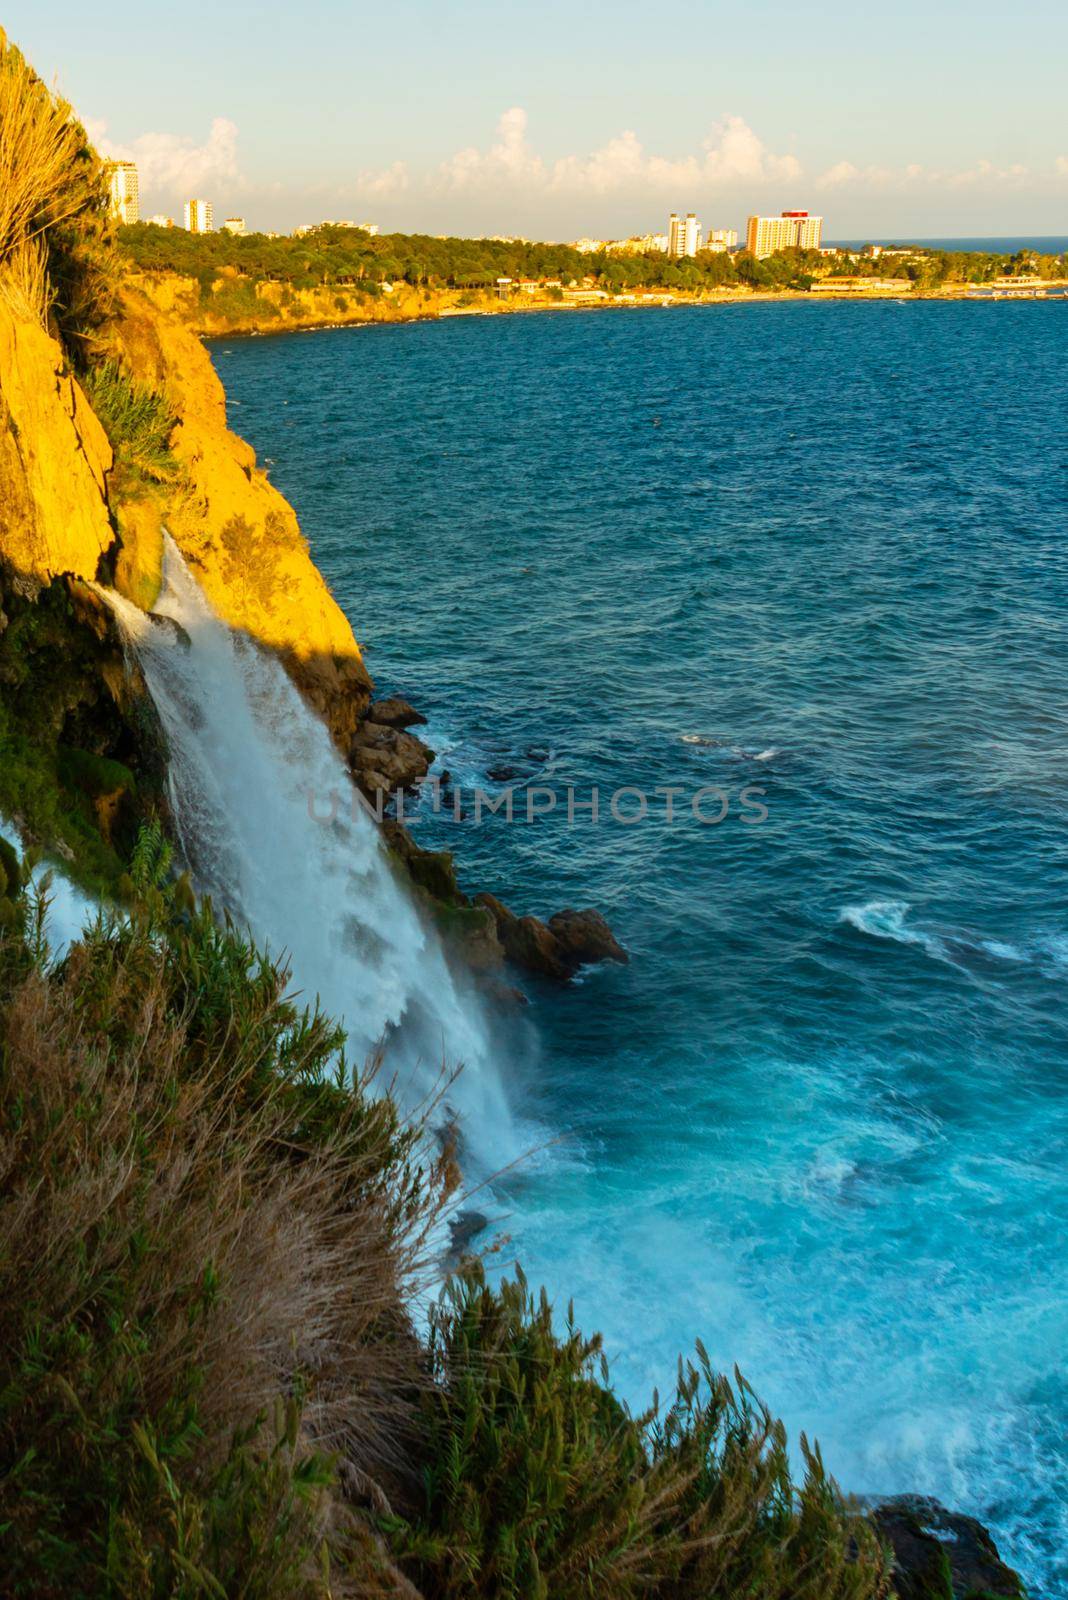 ANTALYA, TURKEY: Landscape with a picturesque view of Waterfall Duden on an evening summer day in Antalya. by Artamonova